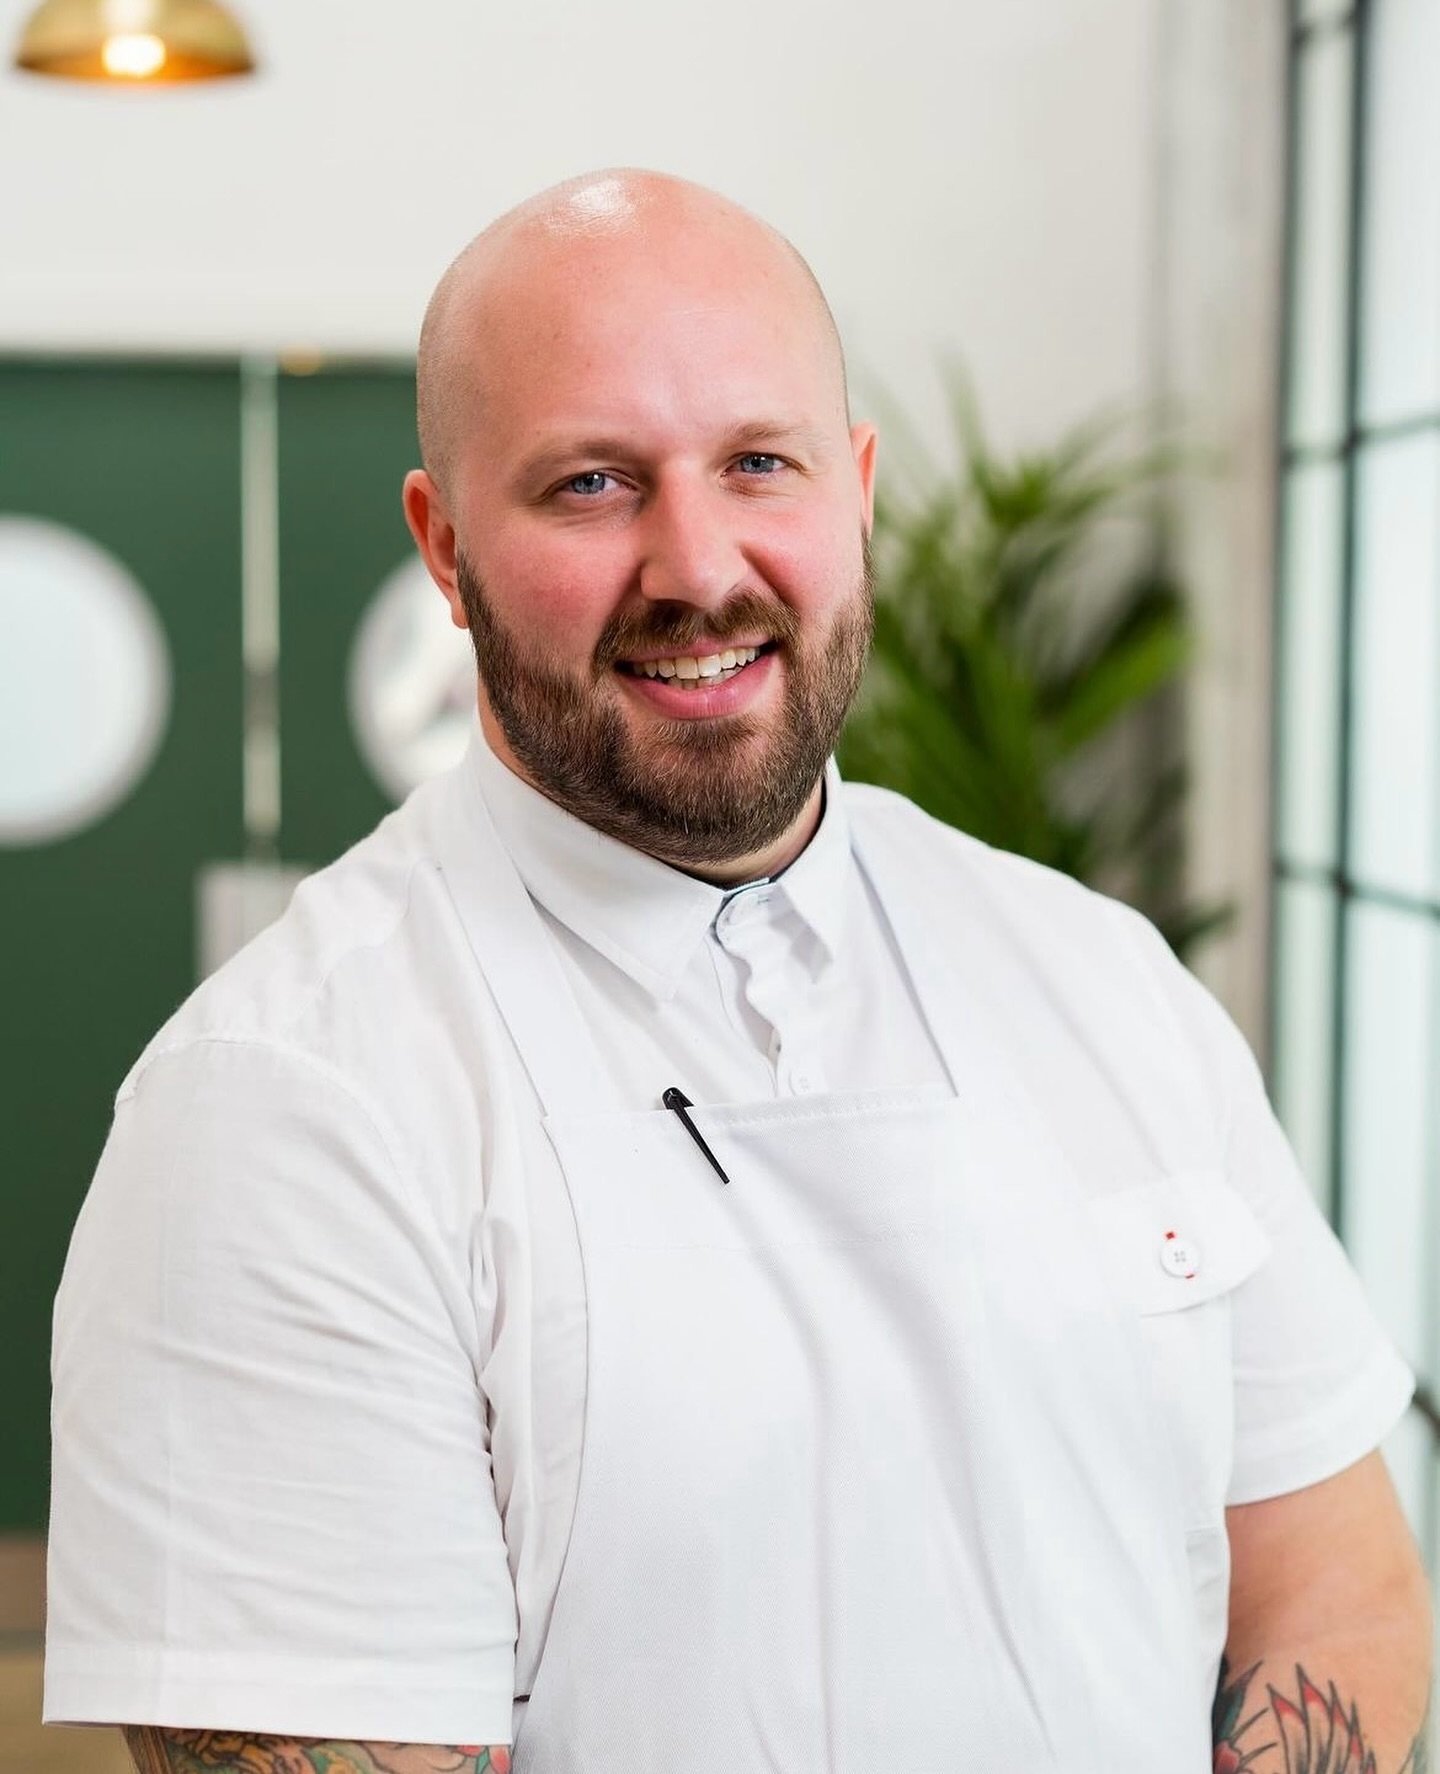 Great British Menu! 🍽

We&rsquo;re so excited to announce that our very own, @adamdegg , will be representing the North East &amp; Yorkshire in this year&rsquo;s @greatbritishmenu 

Adam joined Rudding Park in 2022 as Head Chef at 3 AA Rosette Horto